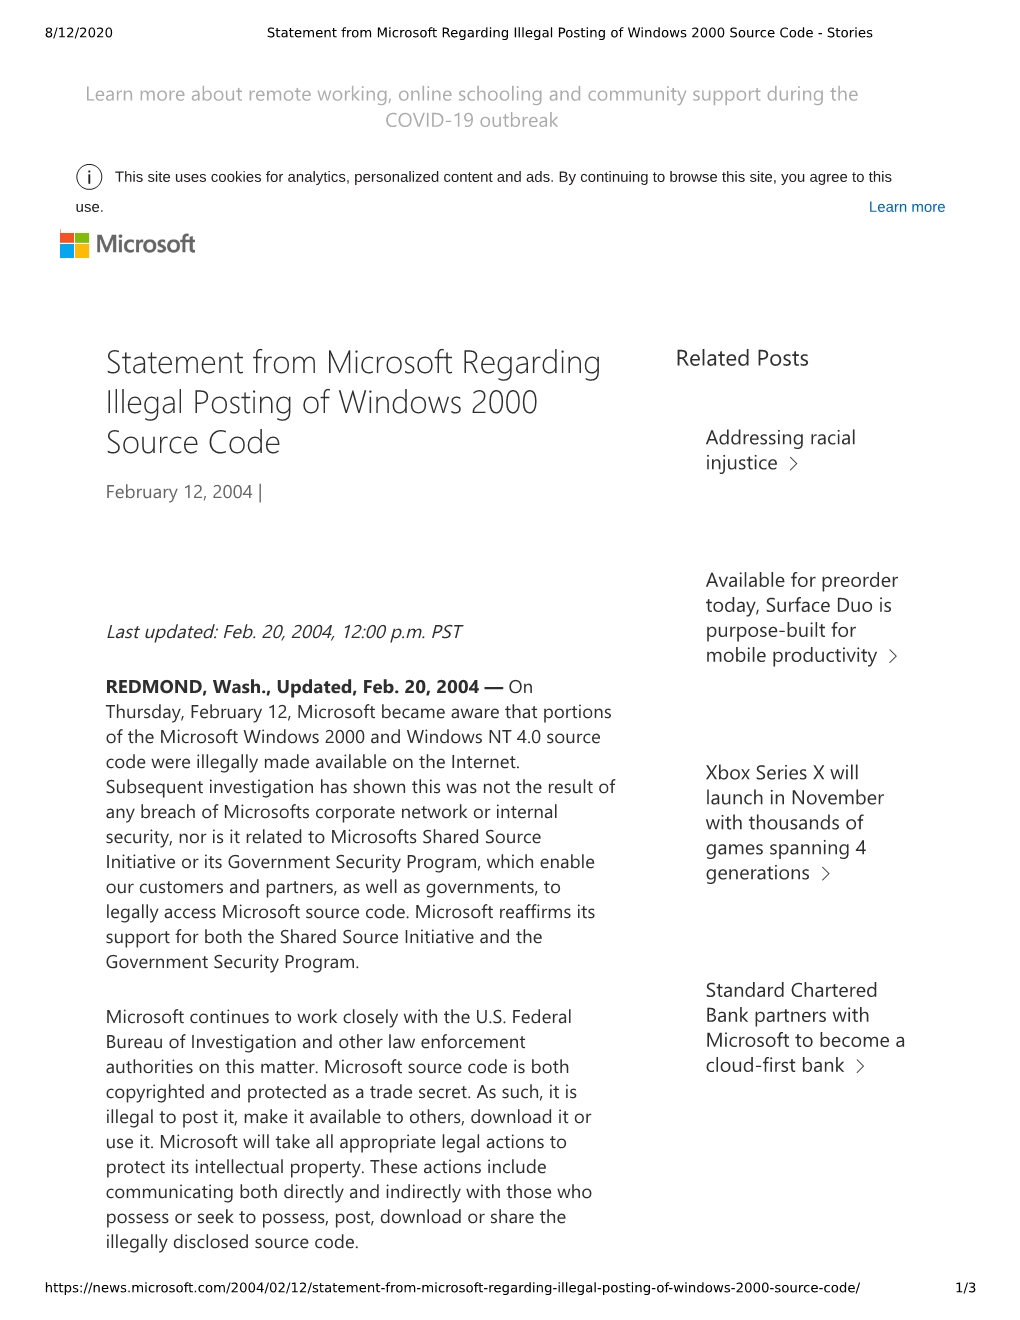 Statement from Microsoft Regarding Illegal Posting of Windows 2000 Source Code - Stories